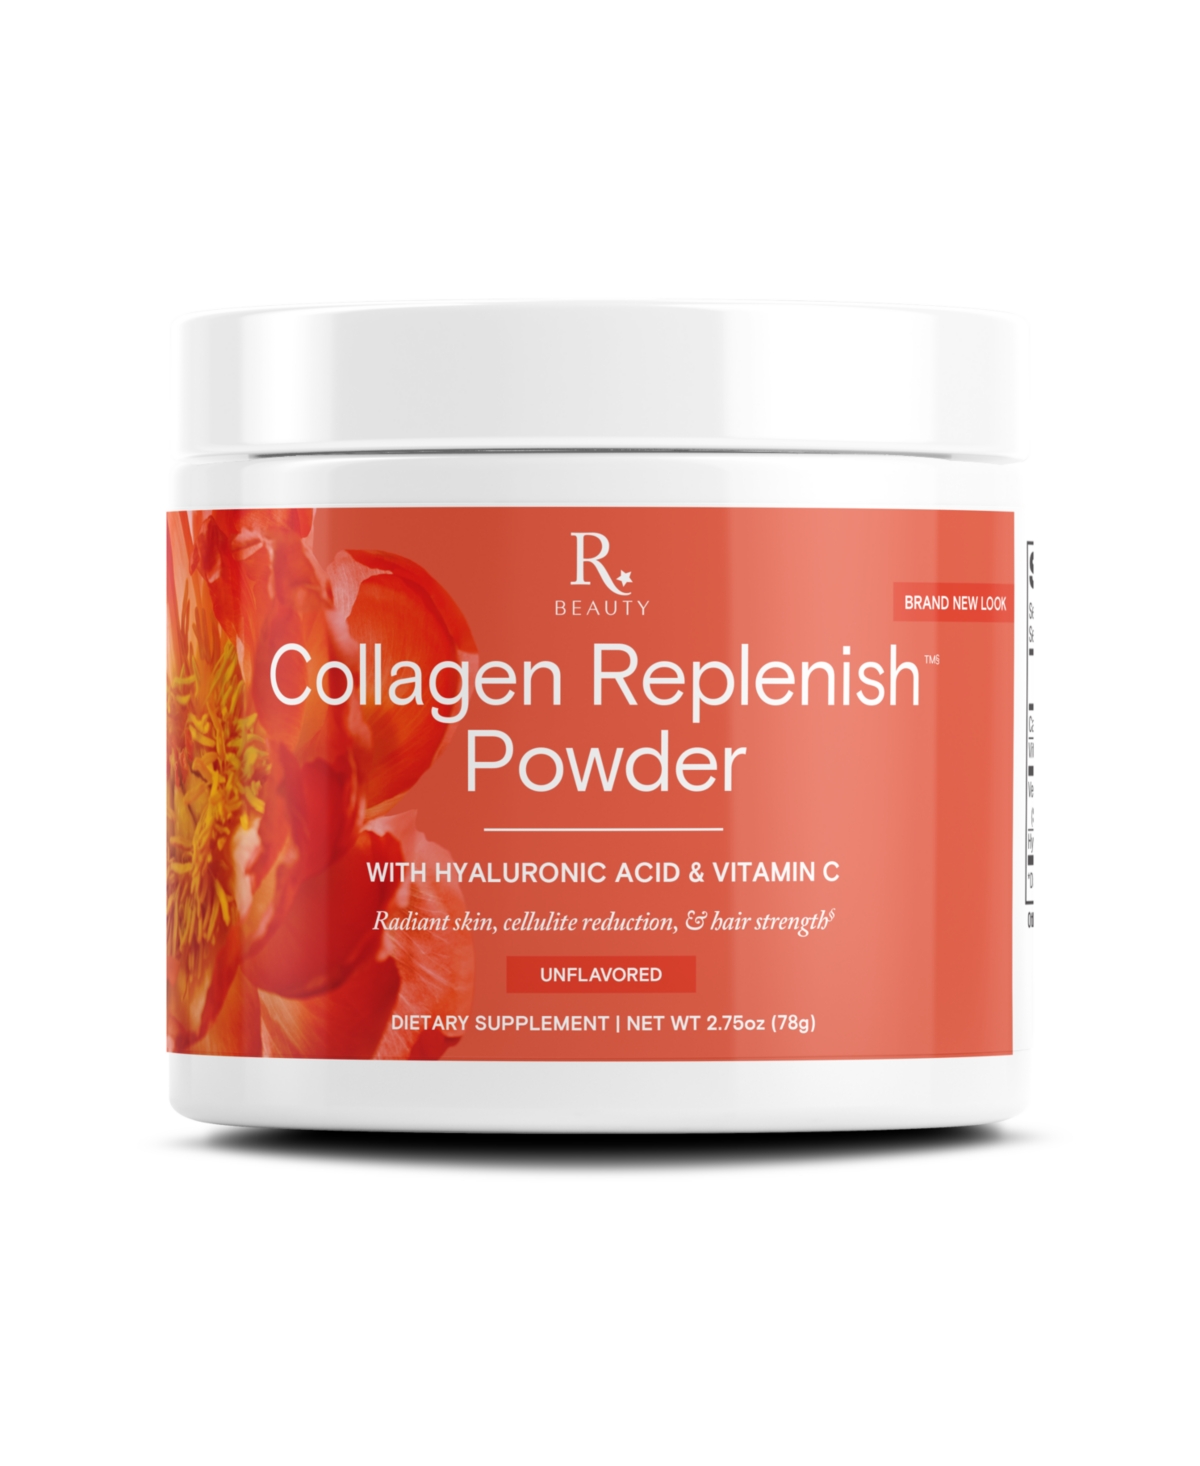 Beauty, Collagen Replenish Powder with Hyaluronic Acid & Vitamin C, for Radiant Skin, Cellulite Reduction & Hair Strength, 2.75 Oz, Unflavo